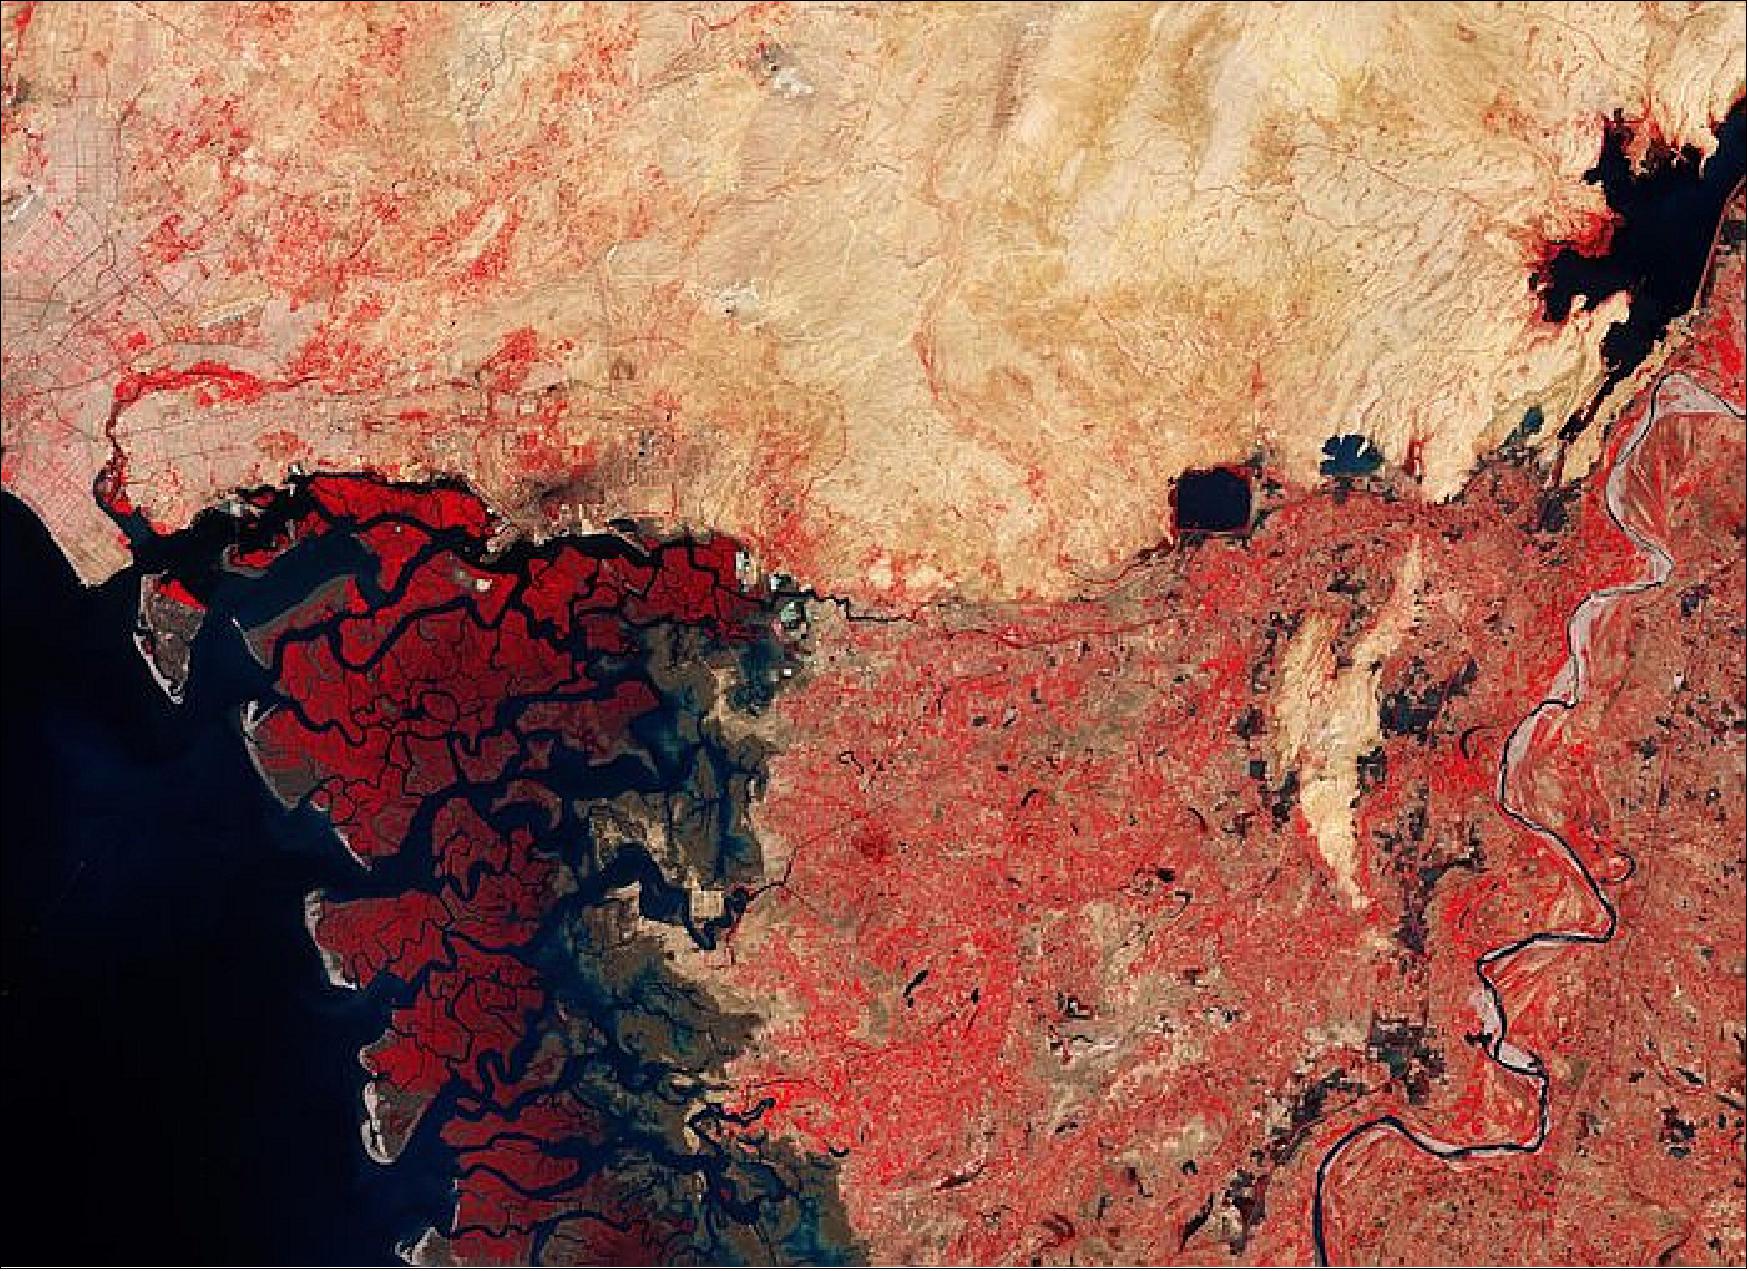 Figure 30: Captured on 14 April 2018 by the Copernicus Sentinel-2A satellite, this image shows western Pakistan and an important wetland area. This image is also featured on the Earth from Space video program (image credit: ESA, the image contains modified Copernicus Sentinel data (2018), processed by ESA, CC BY-SA 3.0 IGO)